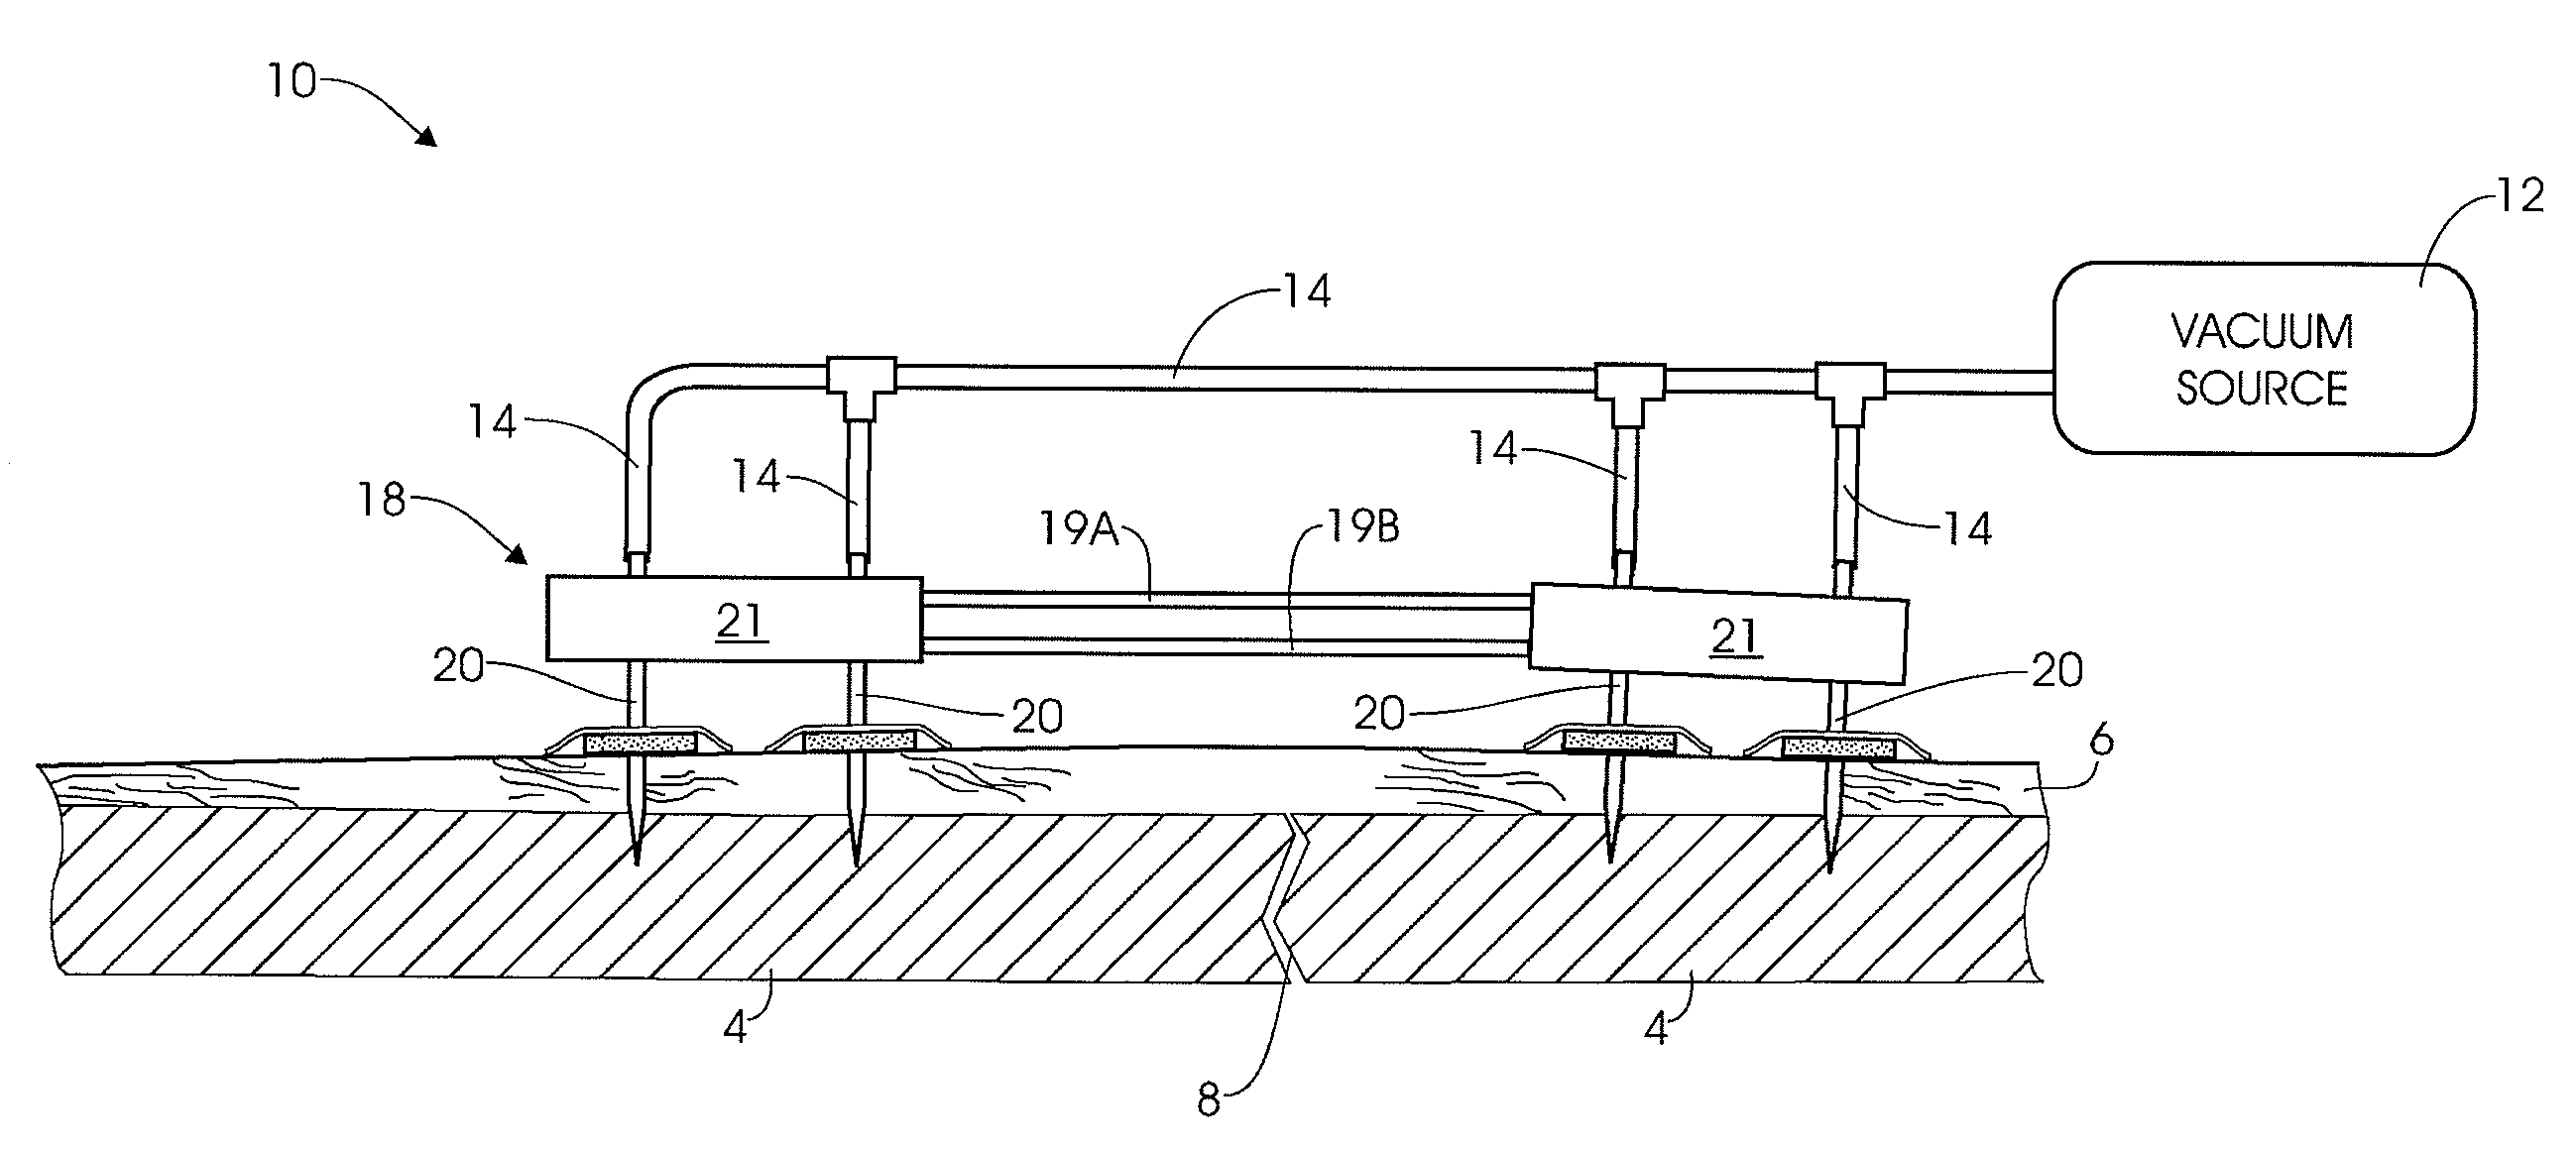 External fixation assembly and method of use